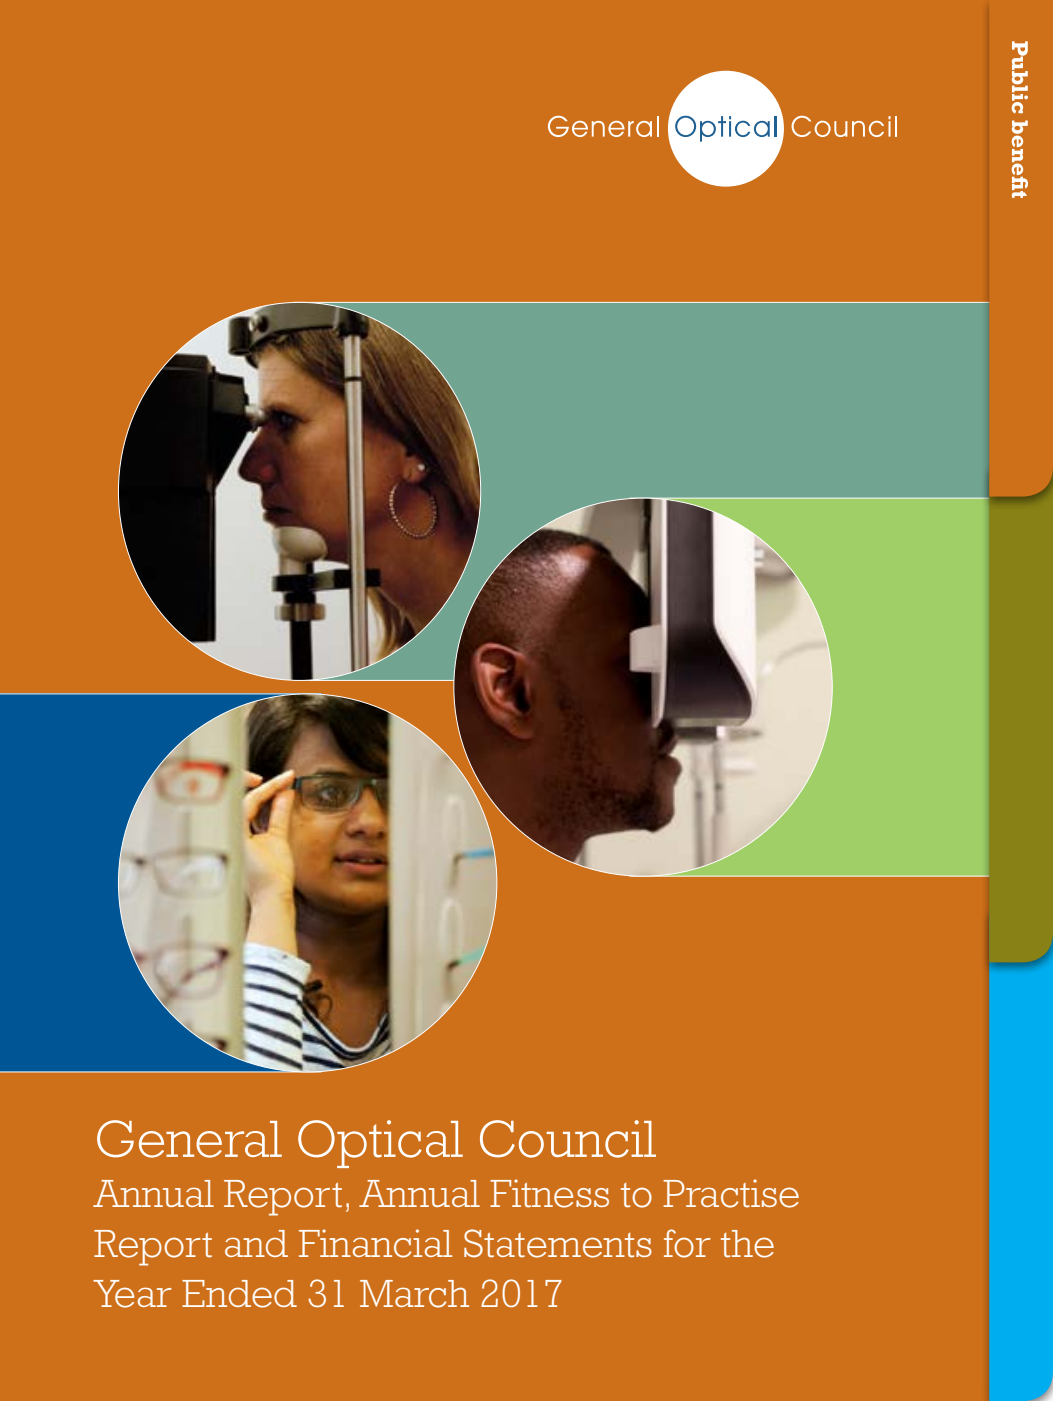 General Optical Council Annual Report, Annual Fitness to Practise Report and Financial Statements for the Year Ended 31 March 2017